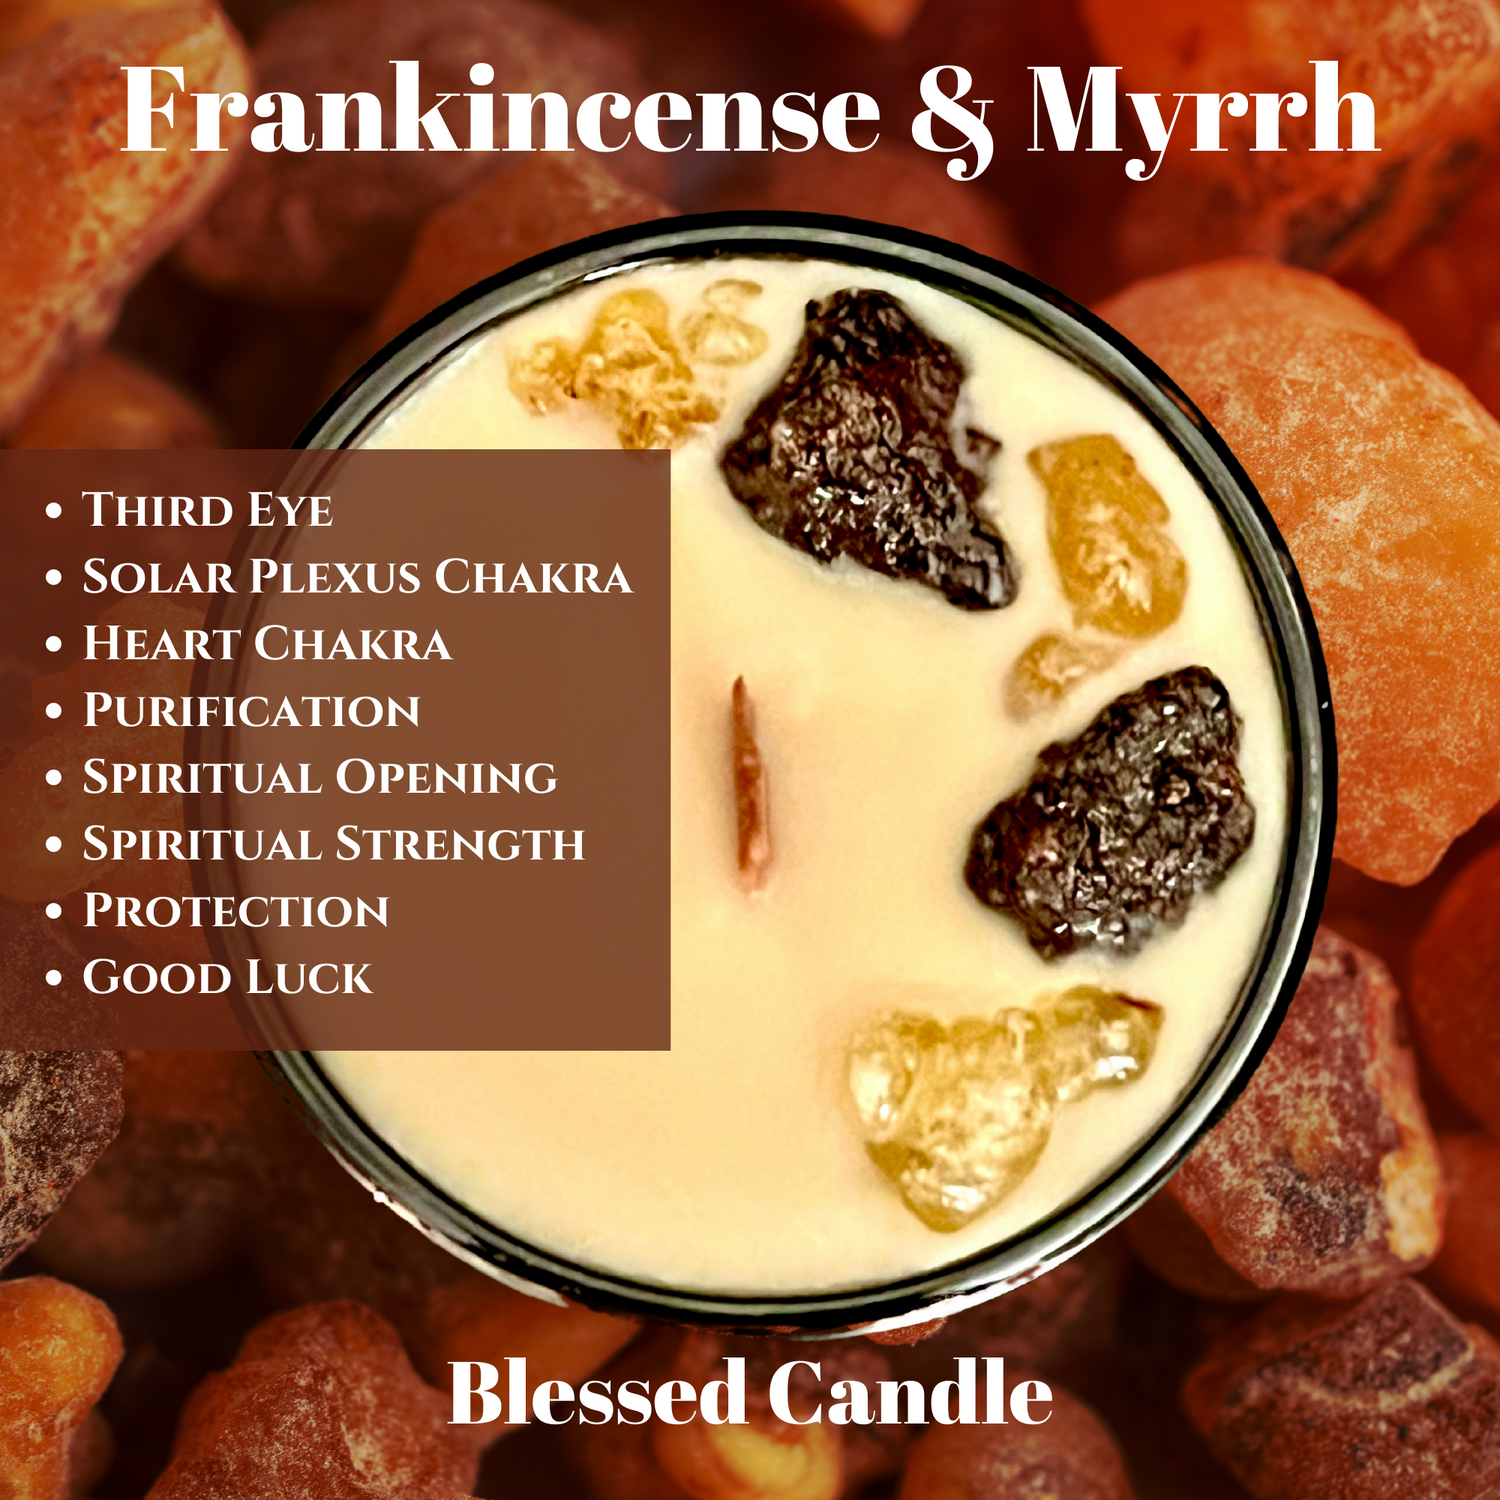 Alchemy7 | Blessed - 16 oz Frankincense and Myrrh Candle/Vela for Spiritual Enlightenment